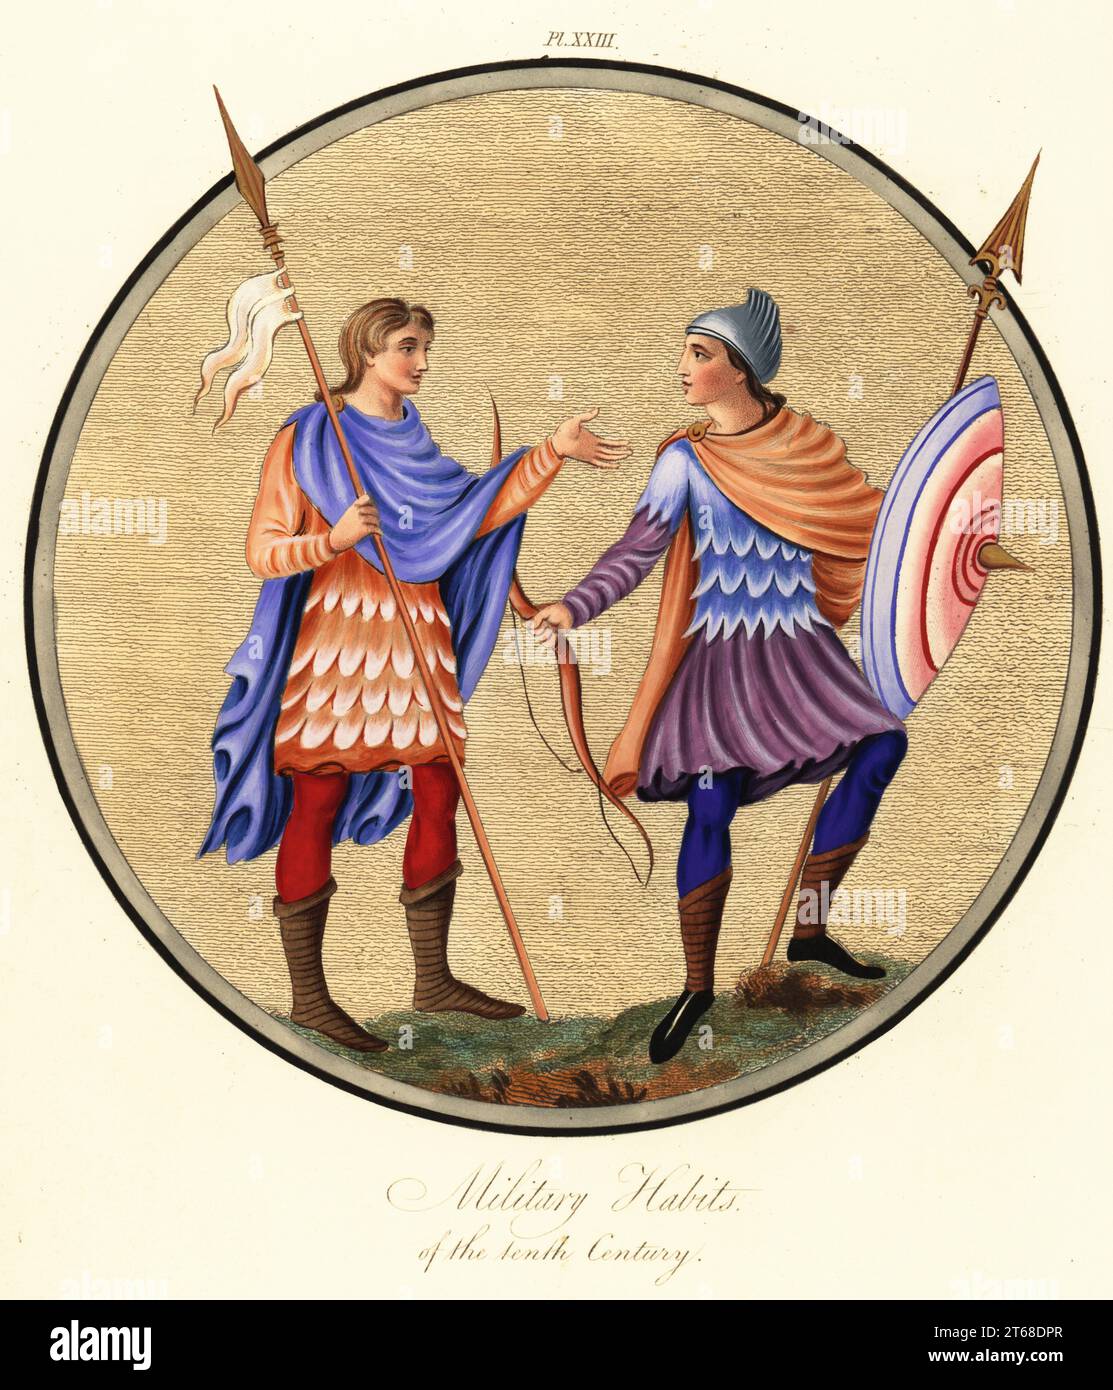 Anglo-Saxon soldiers wearing breastplate and skirts of scale armour. Soldier in helmet, mantle and boots with bow, shield and lance, with standard bearer. Military habits of the 10th century. From the Harley Psalter, Harley MS 603. Handcoloured engraving by Joseph Strutt from his Complete View of the Dress and Habits of the People of England, Henry Bohn, London, 1842. Stock Photo